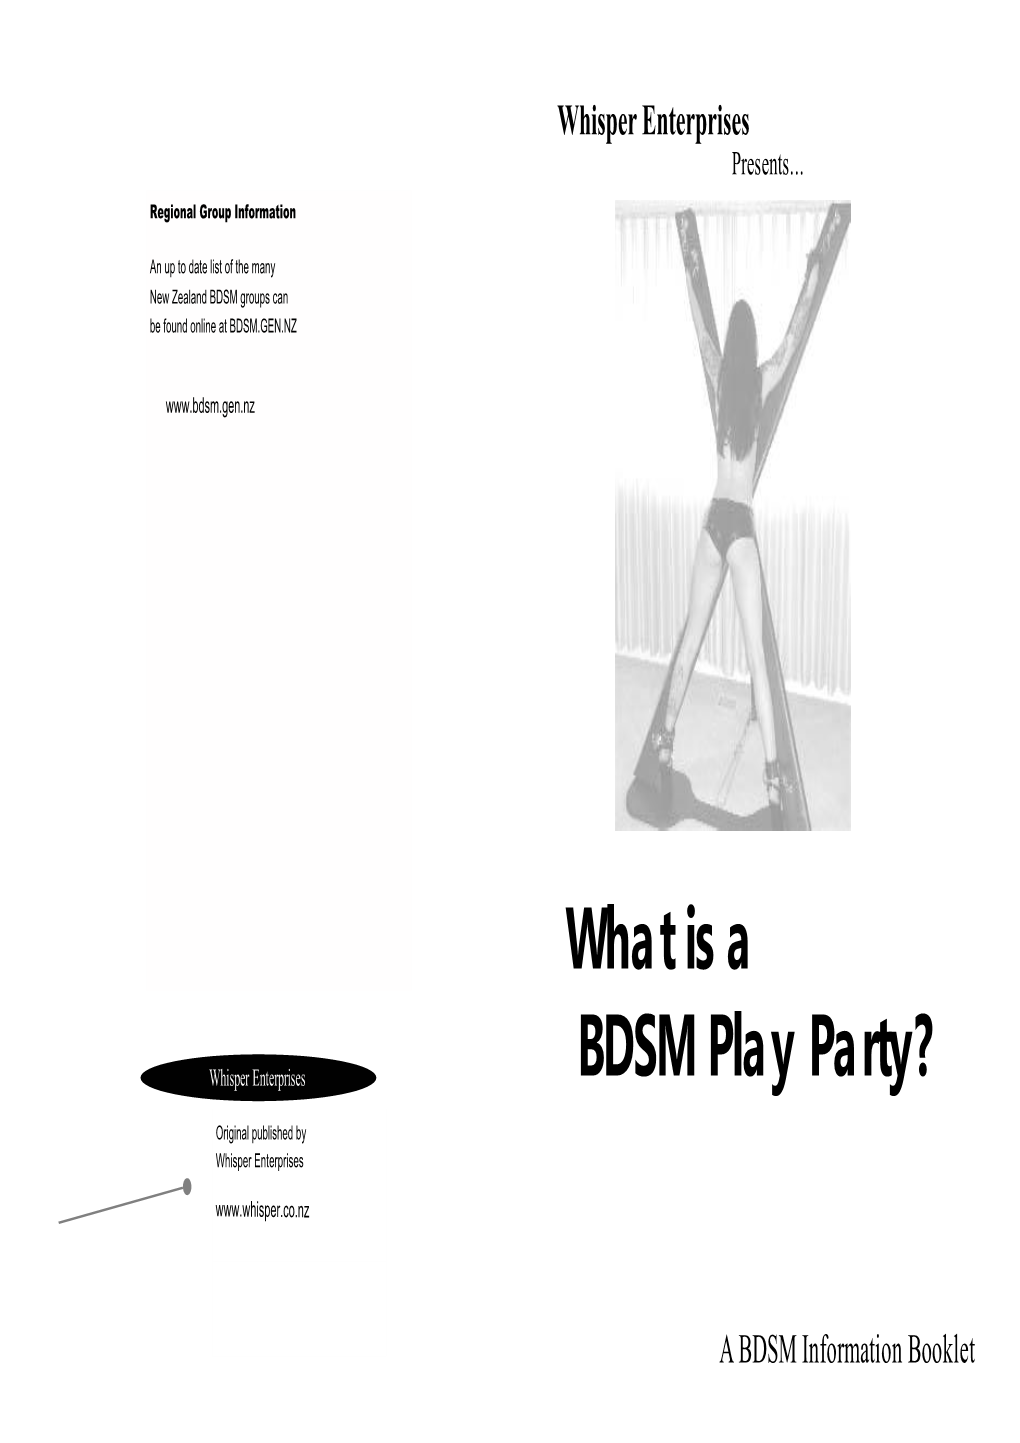 What Is a BDSM Play Party?